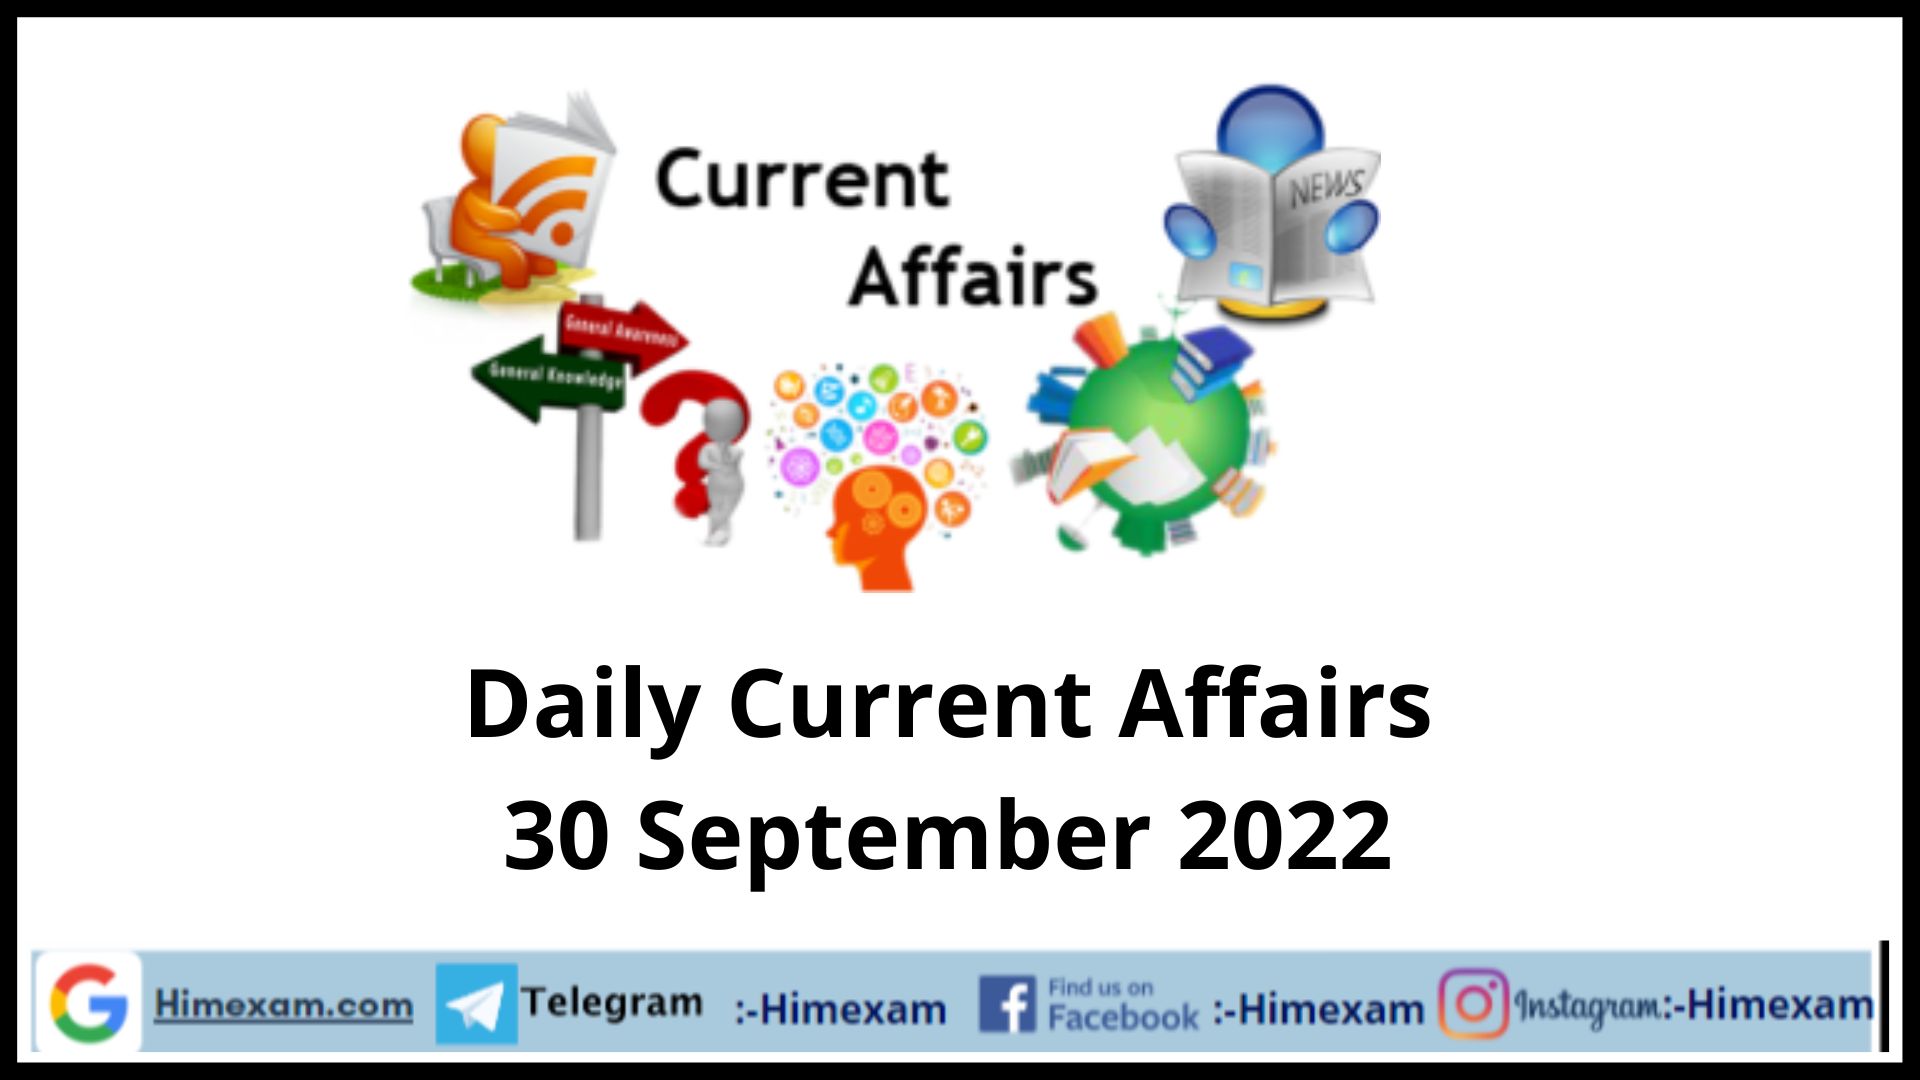 Daily Current Affairs 30 September 2022